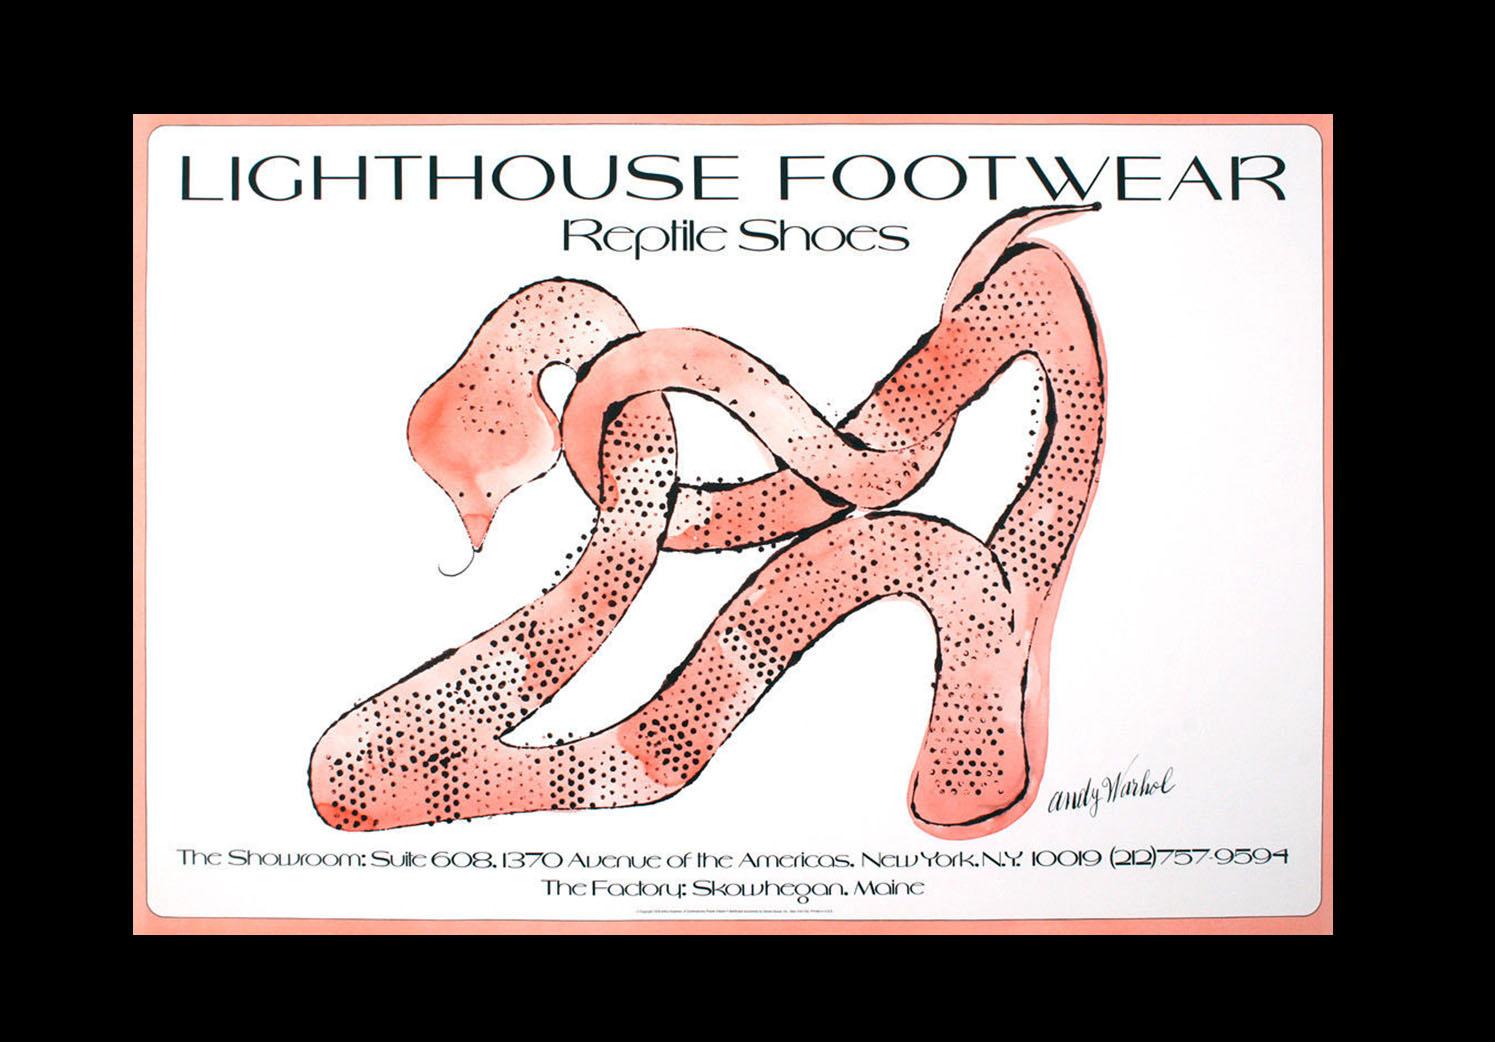 Andy Warhol Reptile Shoes Lithograph (Andy Warhol's shoes)  1